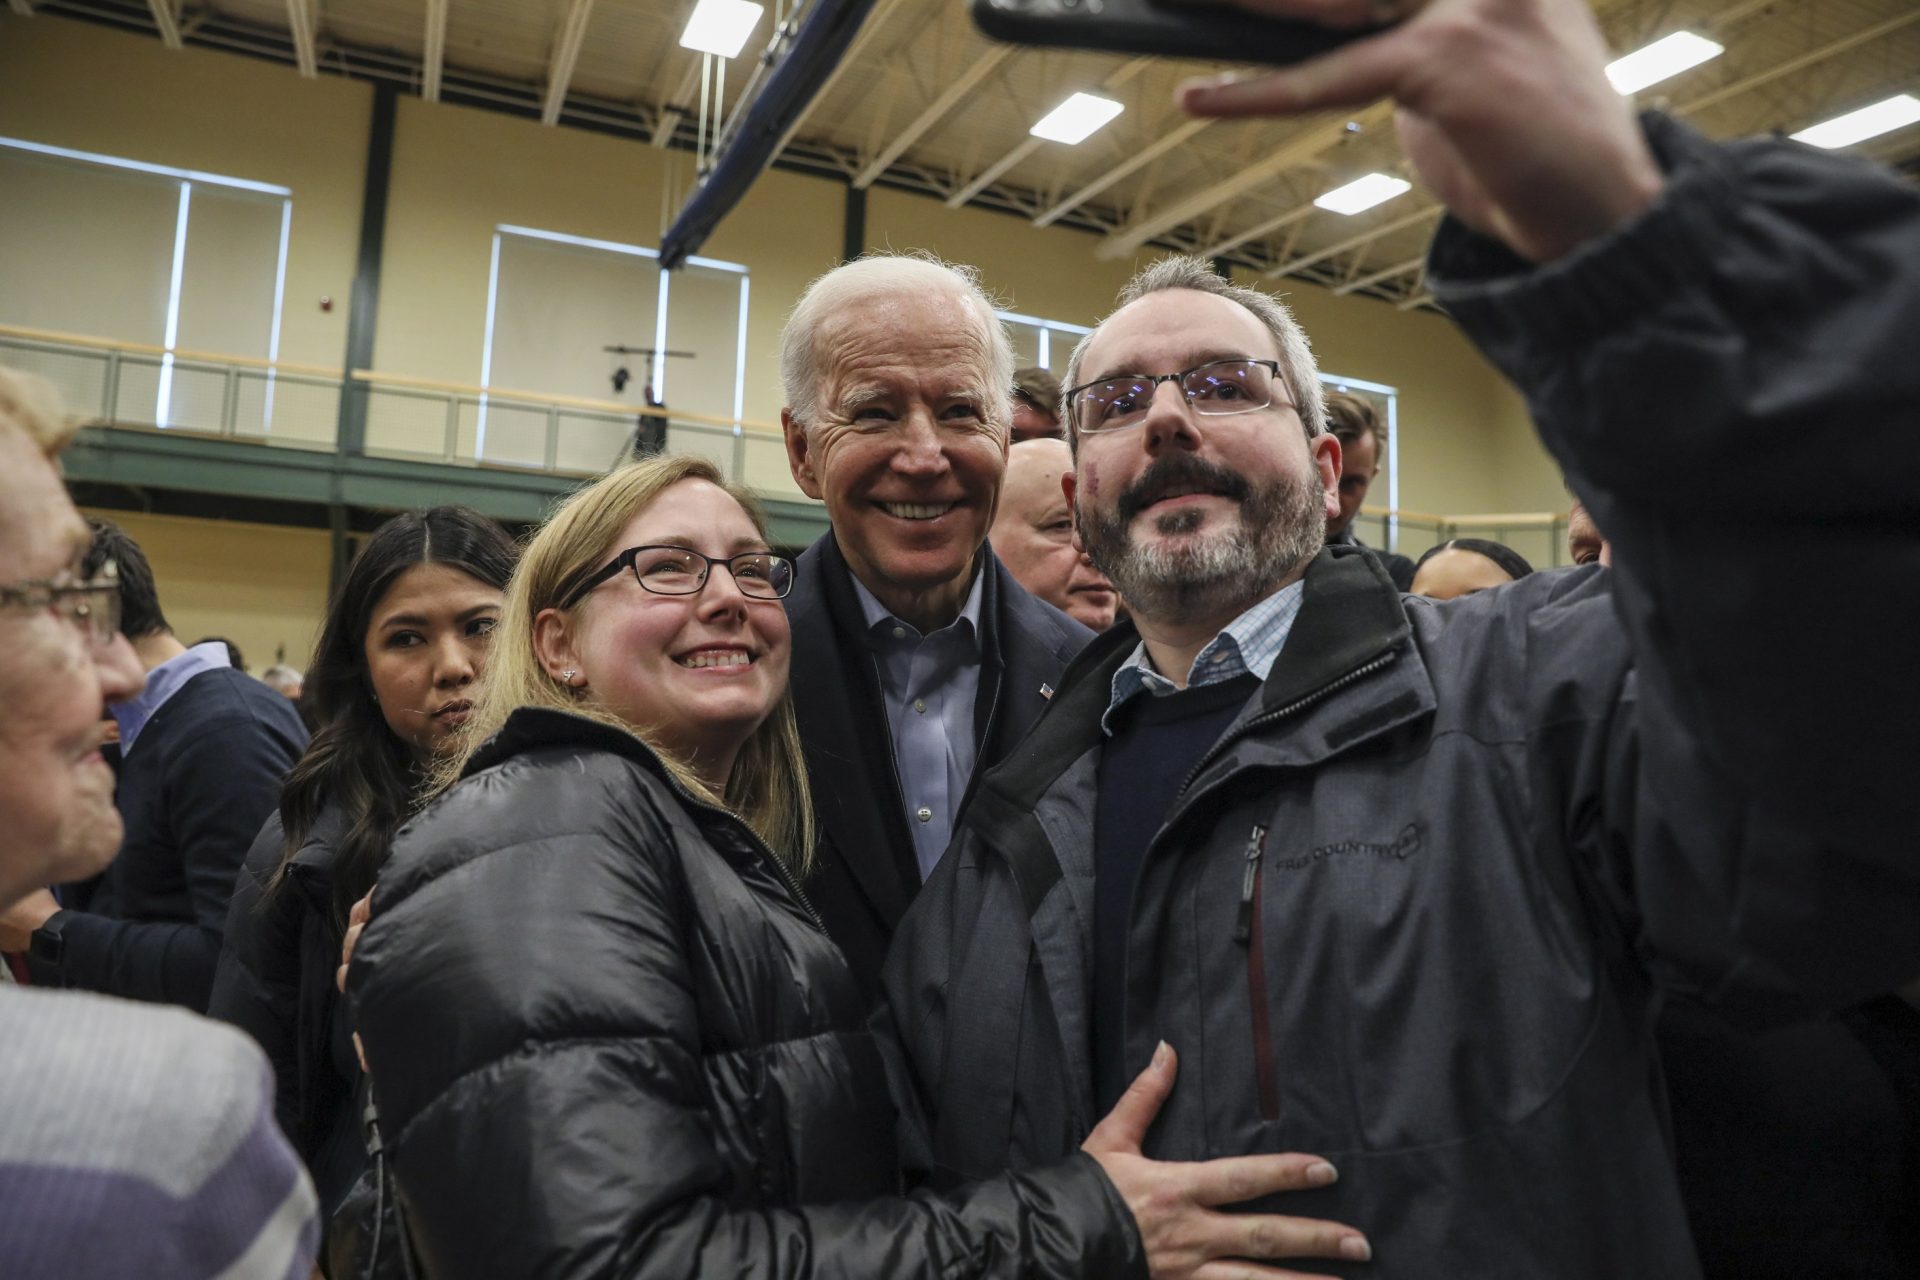 Democratic presidential former Vice President Joe Biden greets supporters after speaking at a campaign event in Nashua, N.H. Sunday, Dec. 8, 2019